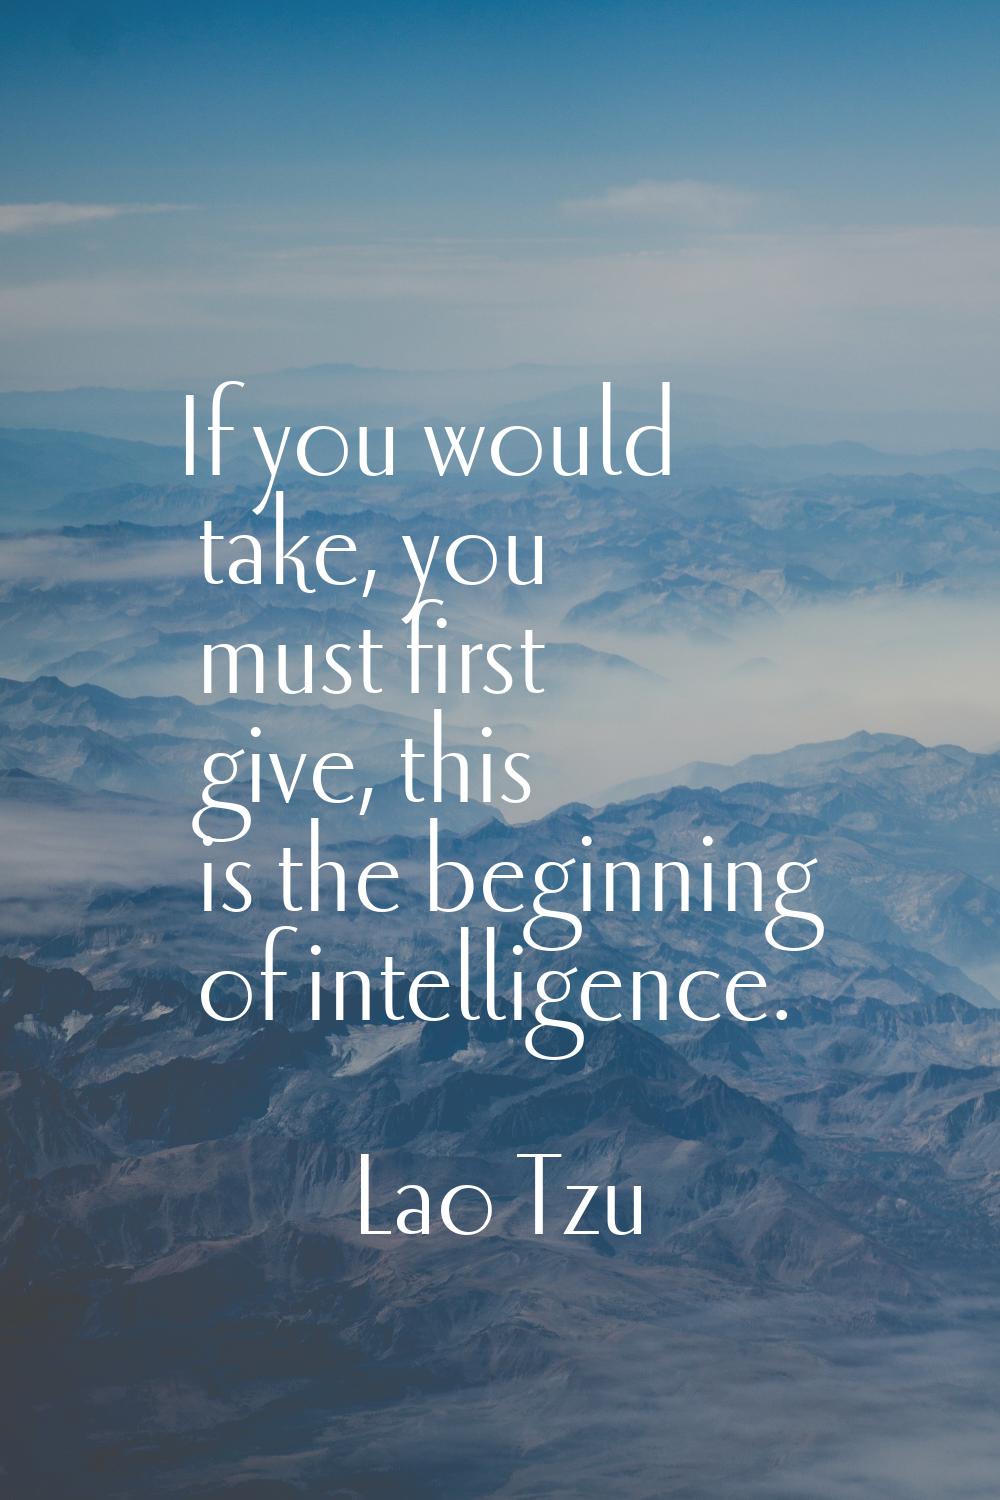 If you would take, you must first give, this is the beginning of intelligence.